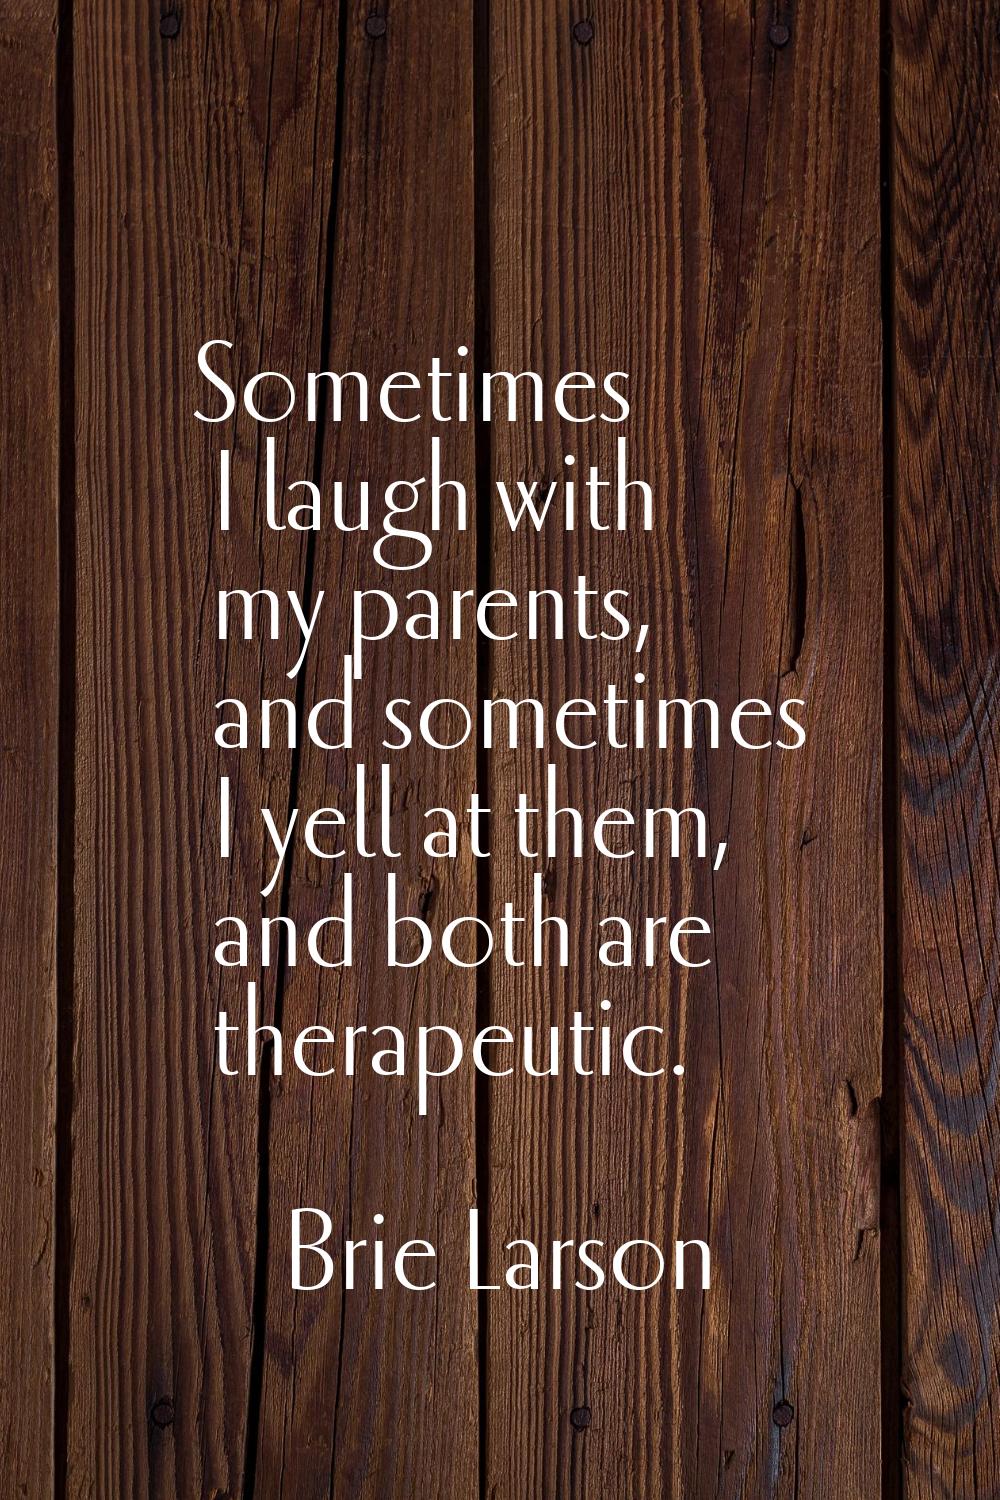 Sometimes I laugh with my parents, and sometimes I yell at them, and both are therapeutic.